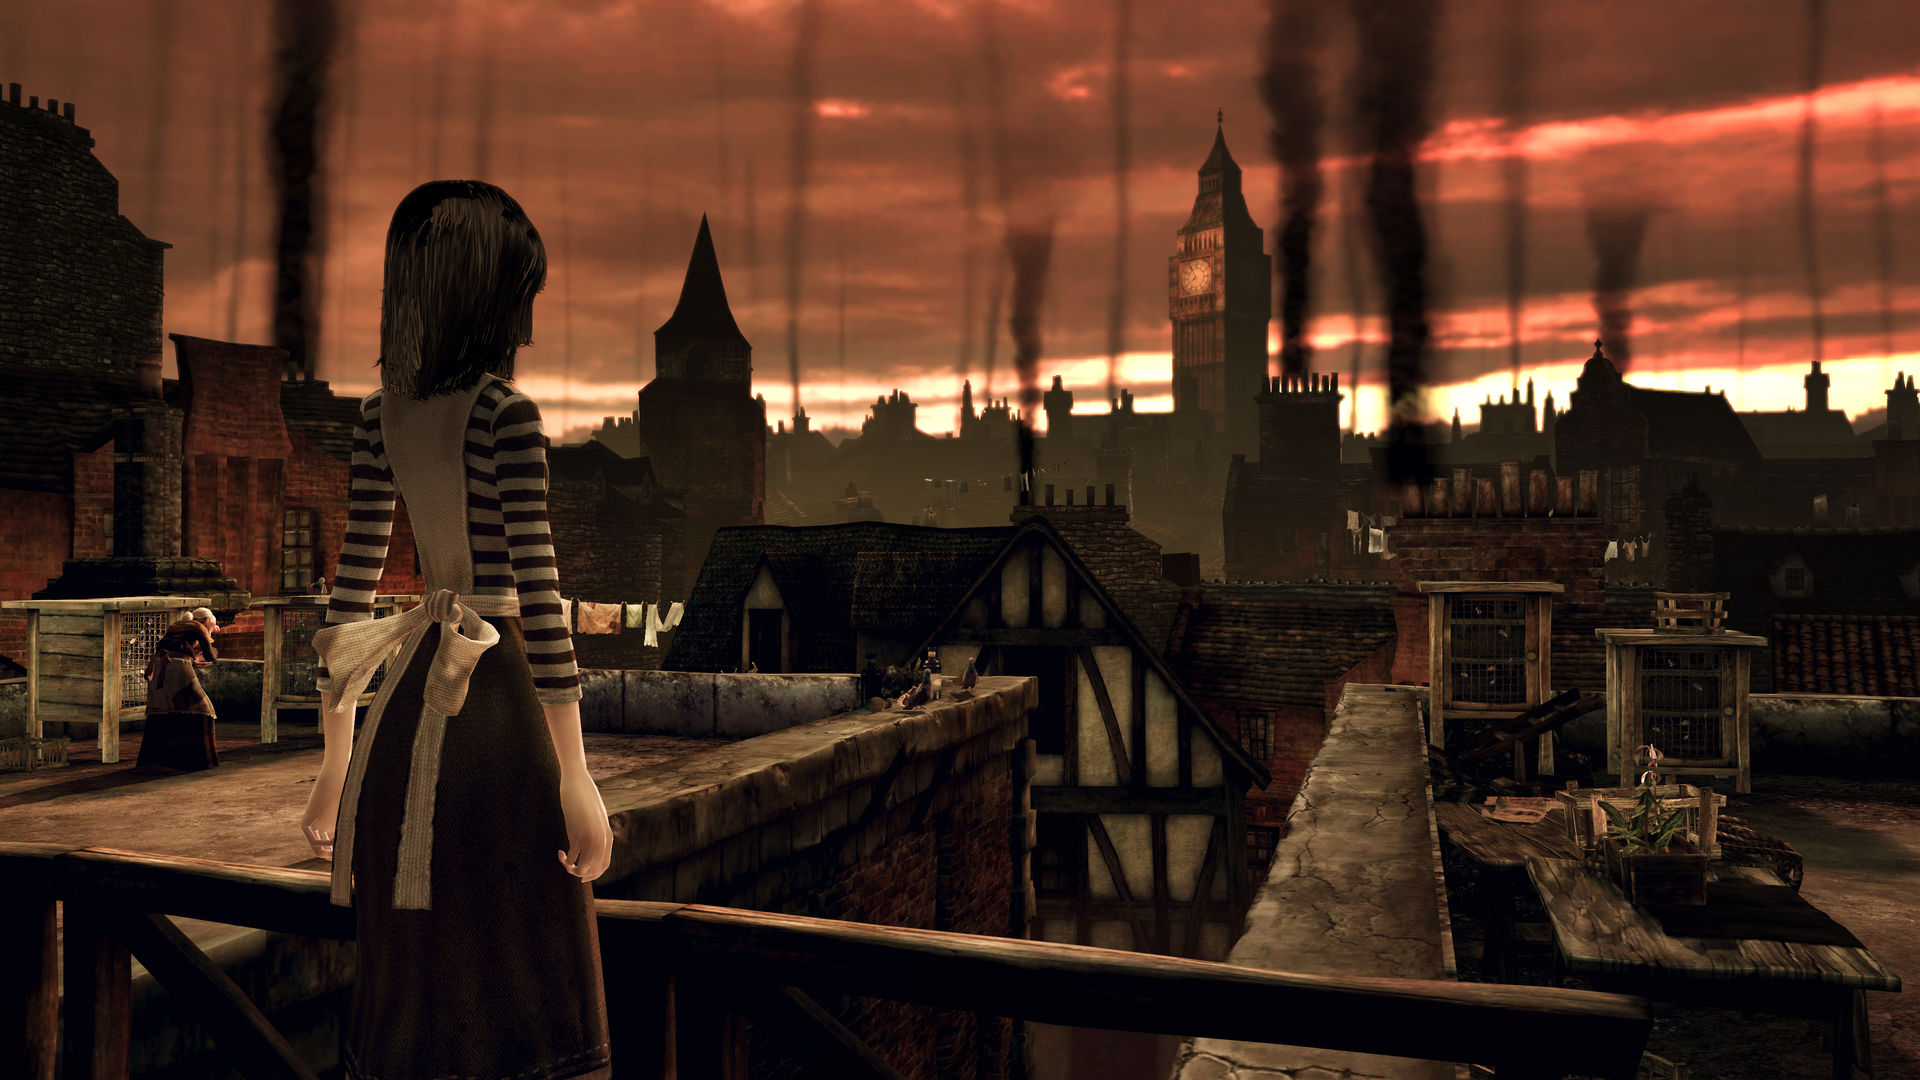 alice madness returns pc download free